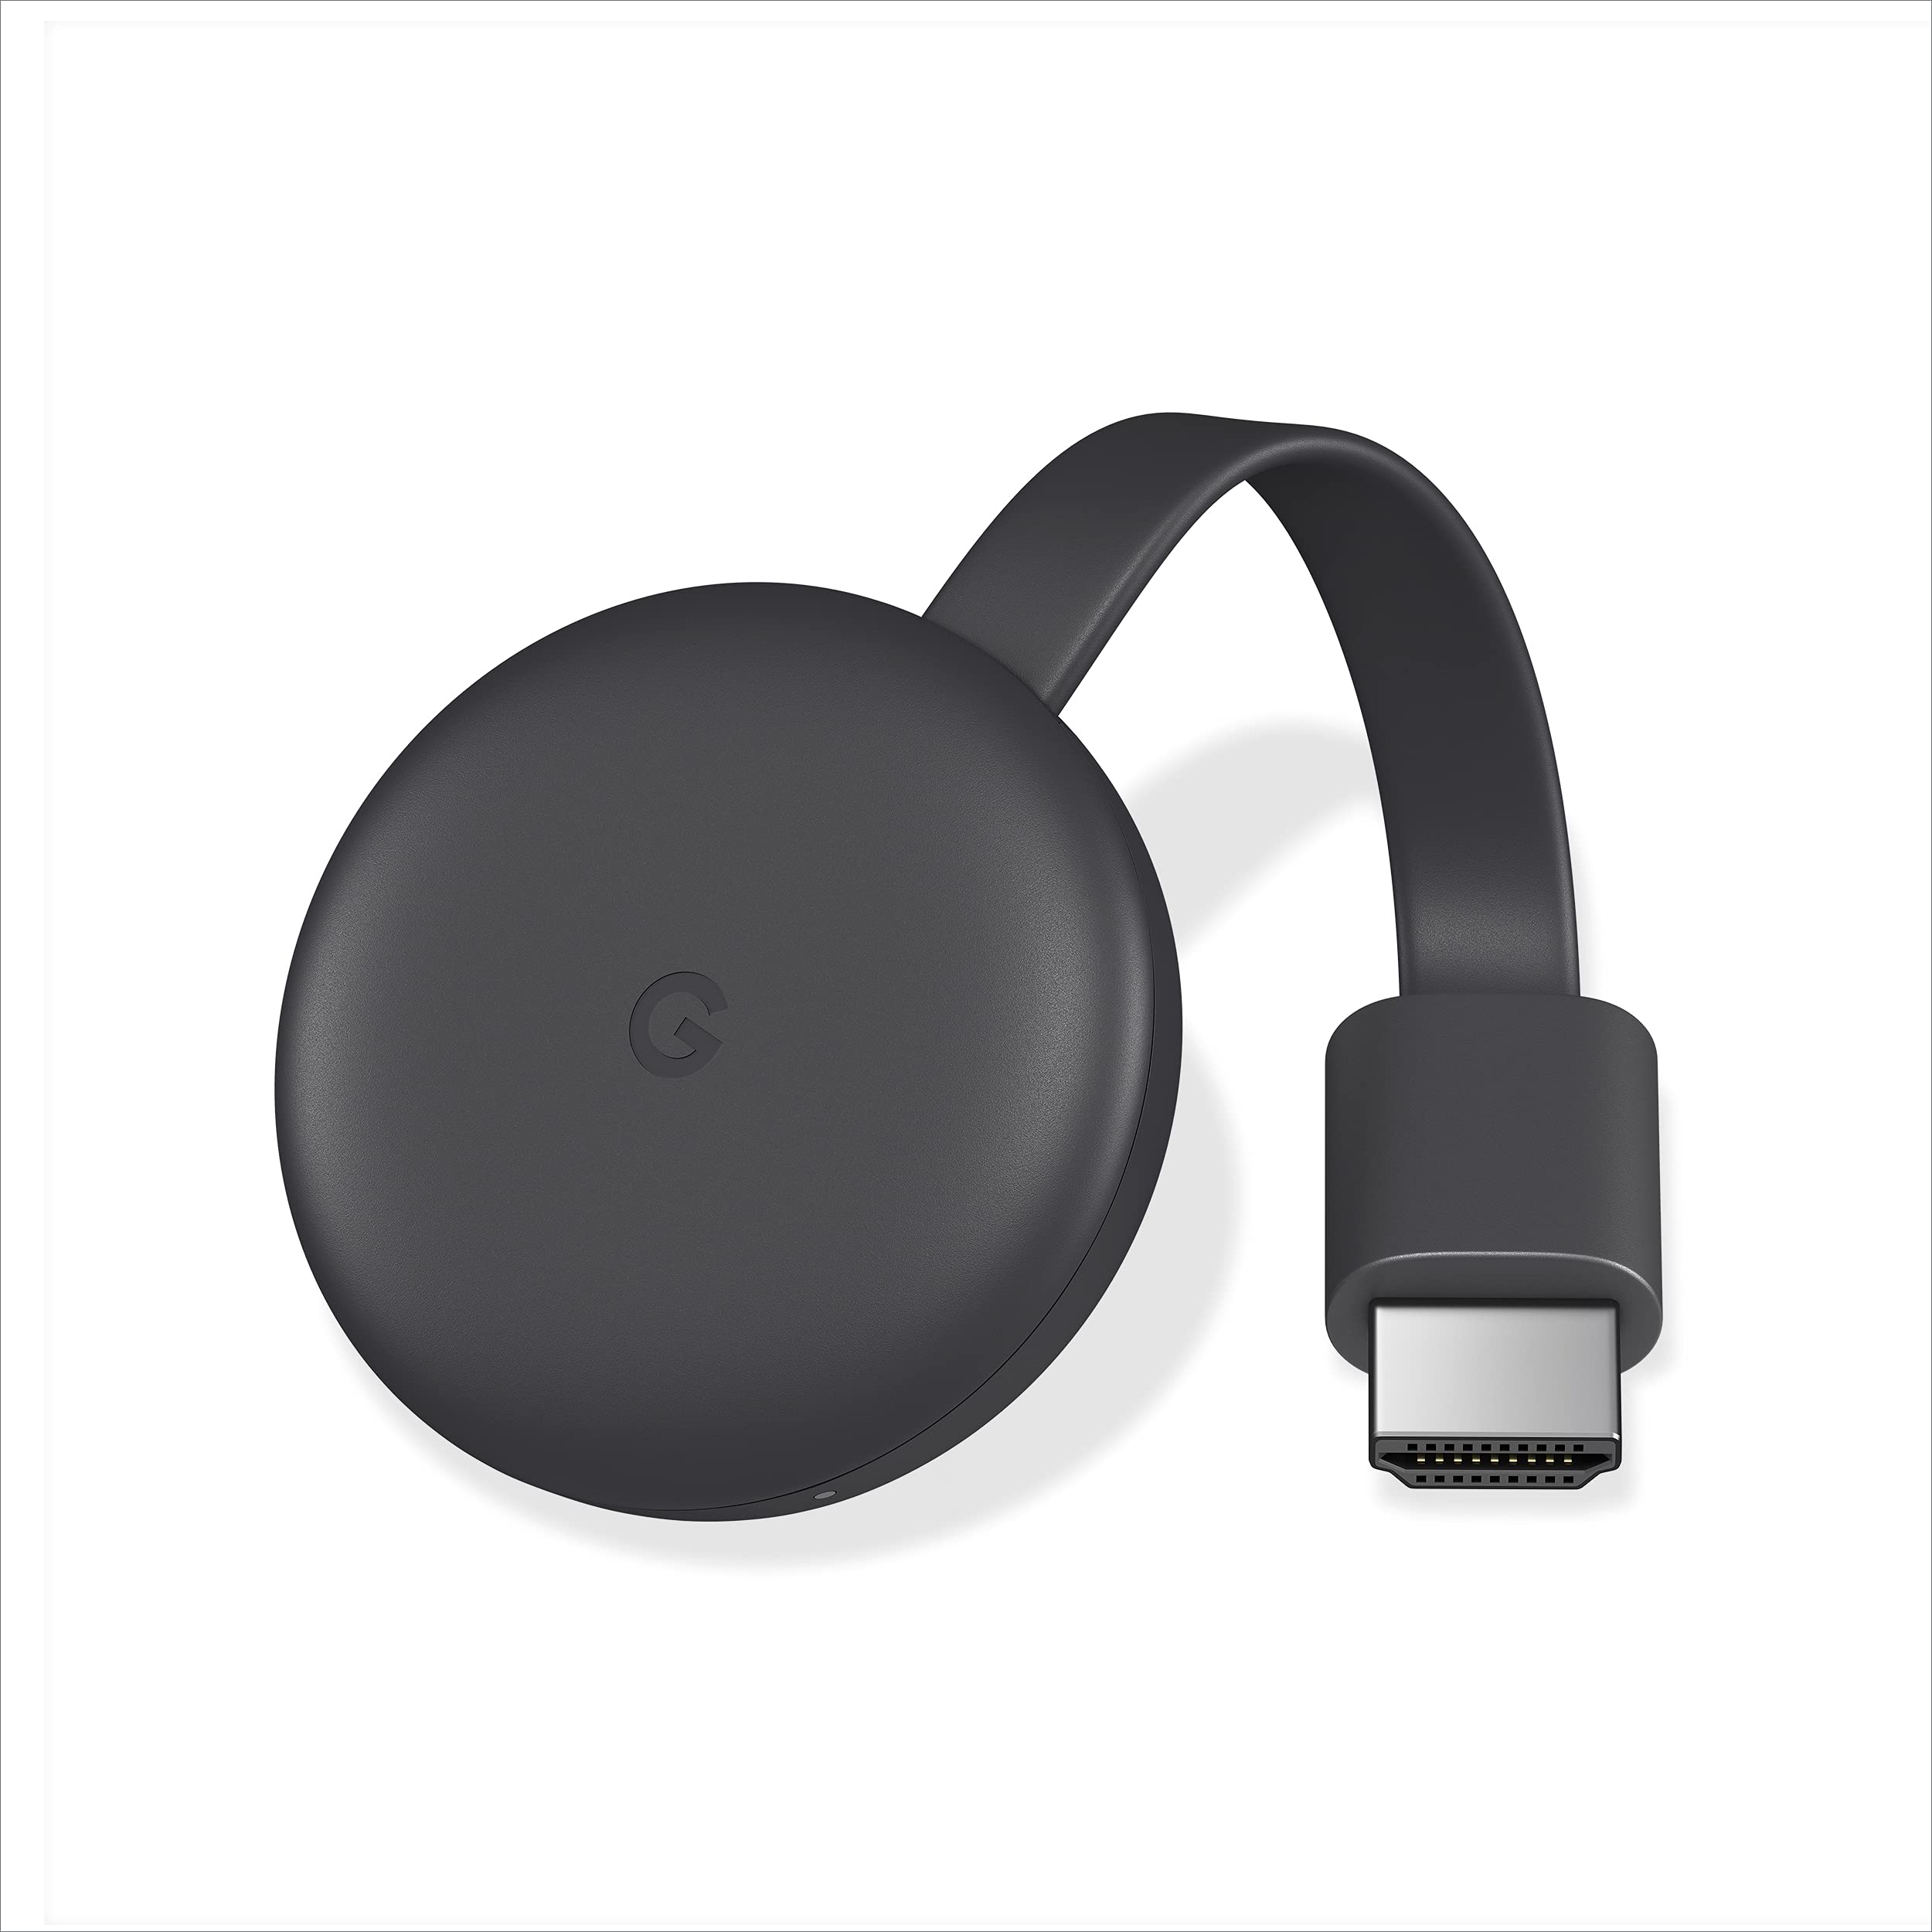 Google Chromecast - Streaming Device with HDMI Cable - Stream Shows, Music, Photos, and Sports from Your Phone to Your TV